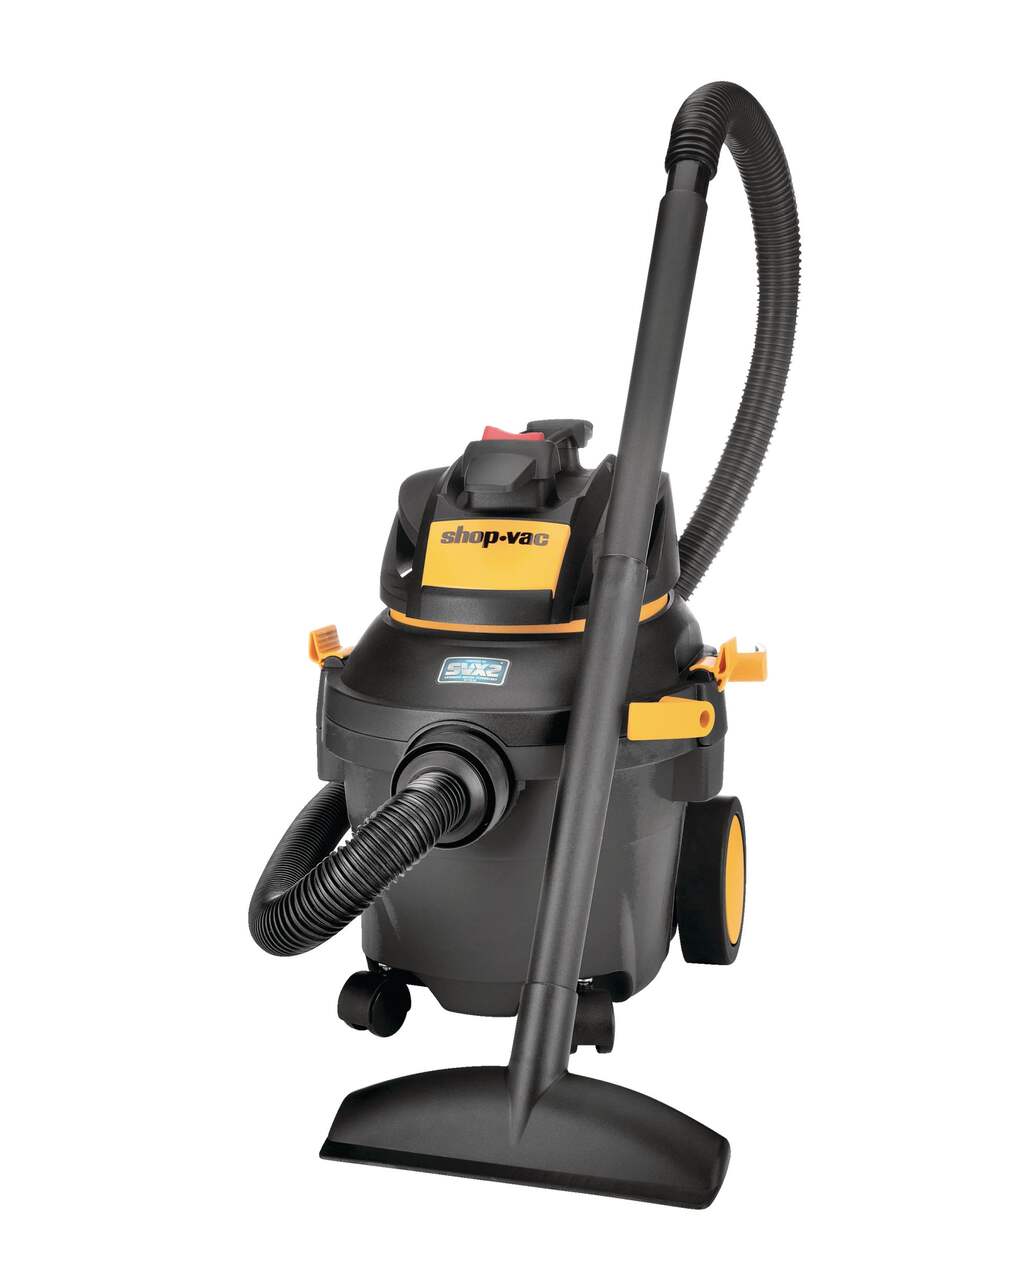 https://media-www.canadiantire.ca/product/fixing/tools/wet-dry-vacuums/0540331/shop-vac-15l-4g-oval-wet-dry-vac-c7f8c317-fc6d-4872-945b-cfcb8509abea-jpgrendition.jpg?imdensity=1&imwidth=1244&impolicy=mZoom